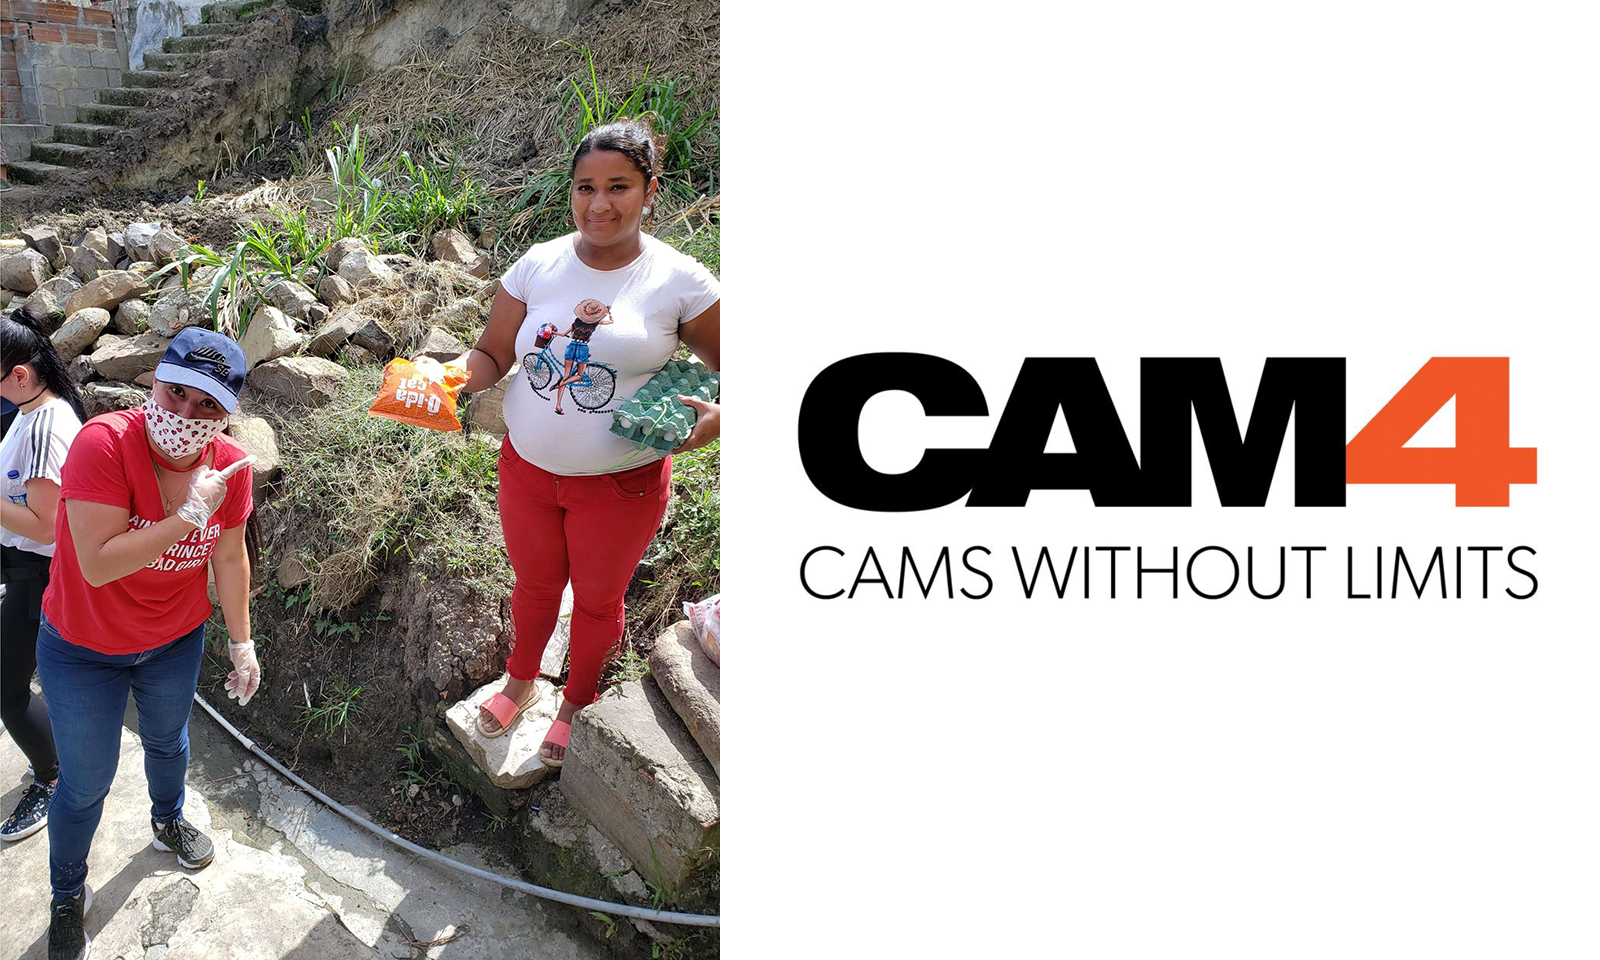 Cam4 Provides Food and Supplies to Colombia's Needy